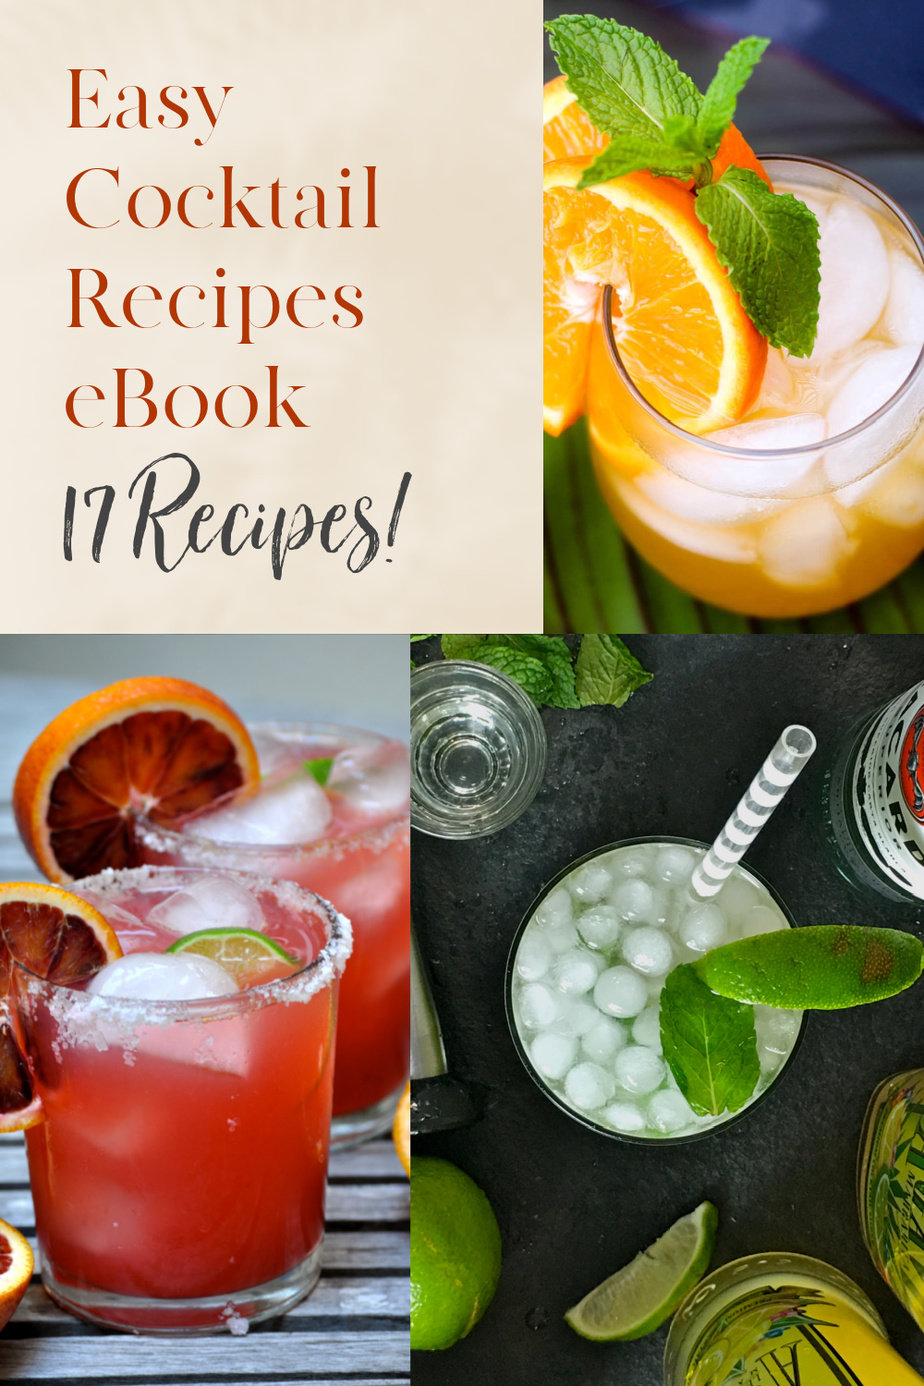 Enjoy these easy refreshing summer cocktail recipes during happy hour and summer BBQ parties! These drink recipes can be enjoyed all year long! Cheers! Low Carb Cocktails | Summer Cocktails | Margarita Recipes | Easy Drink Recipes | Party Recipes | Party Food Ideas via @thebestoflife